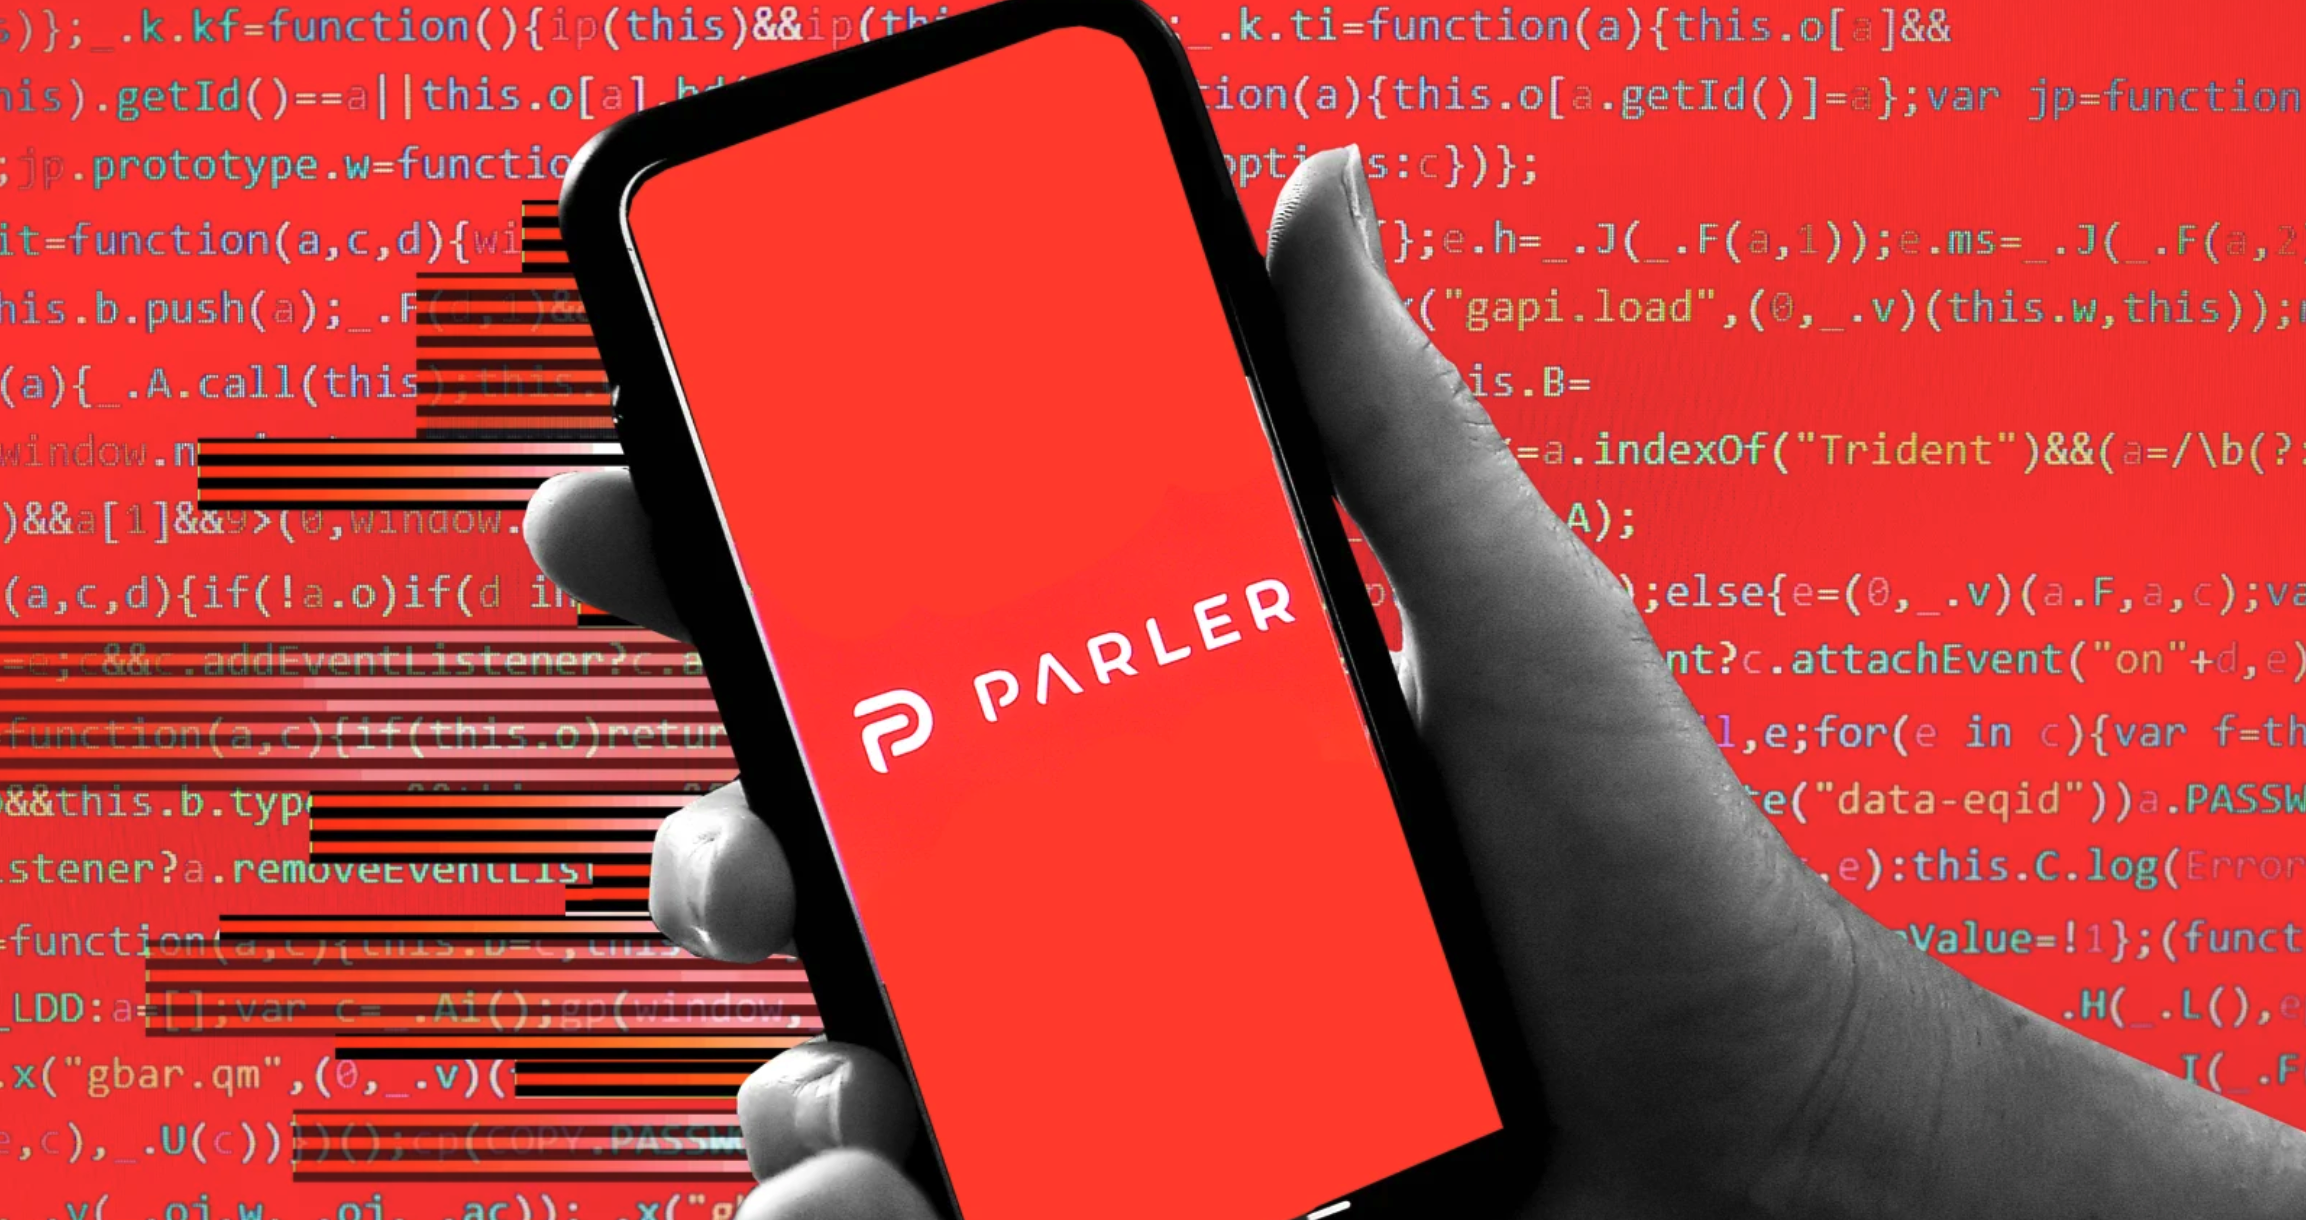 Parler Wasn't Hacked, but That Doesn't Mean It's Safe to Use